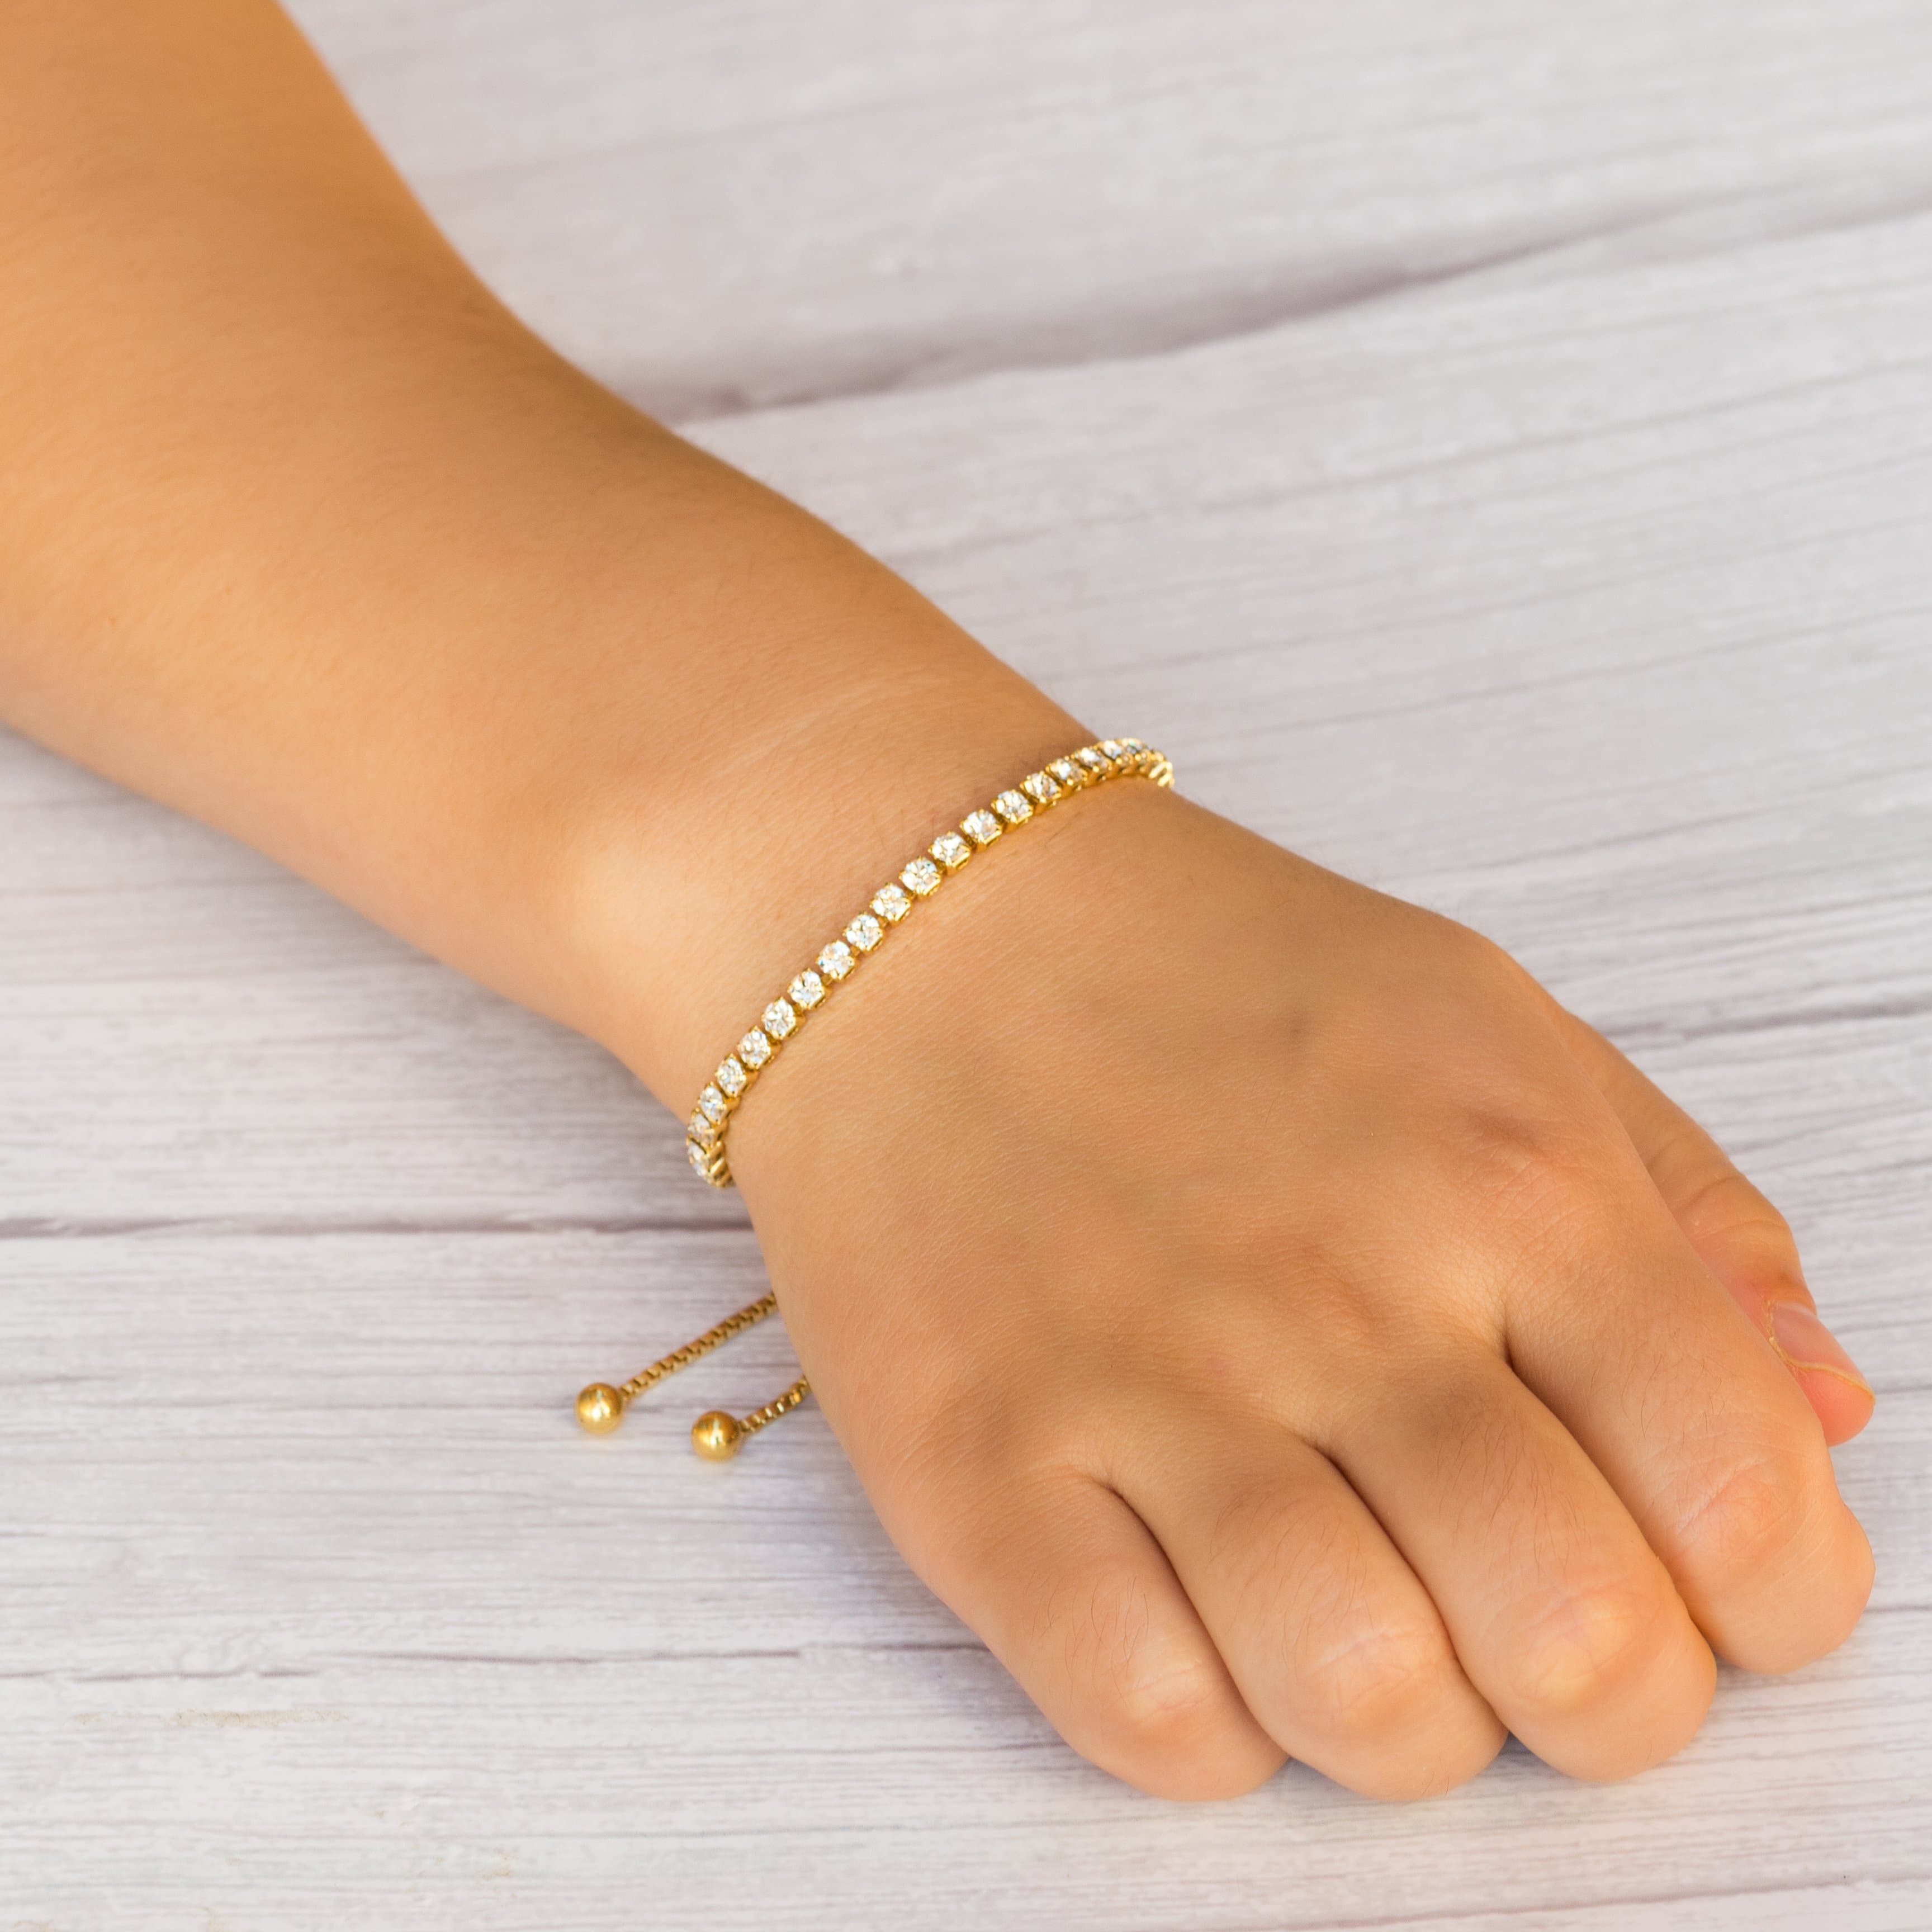 Gold Plated Solitaire Friendship Bracelet Created with Zircondia® Crystals